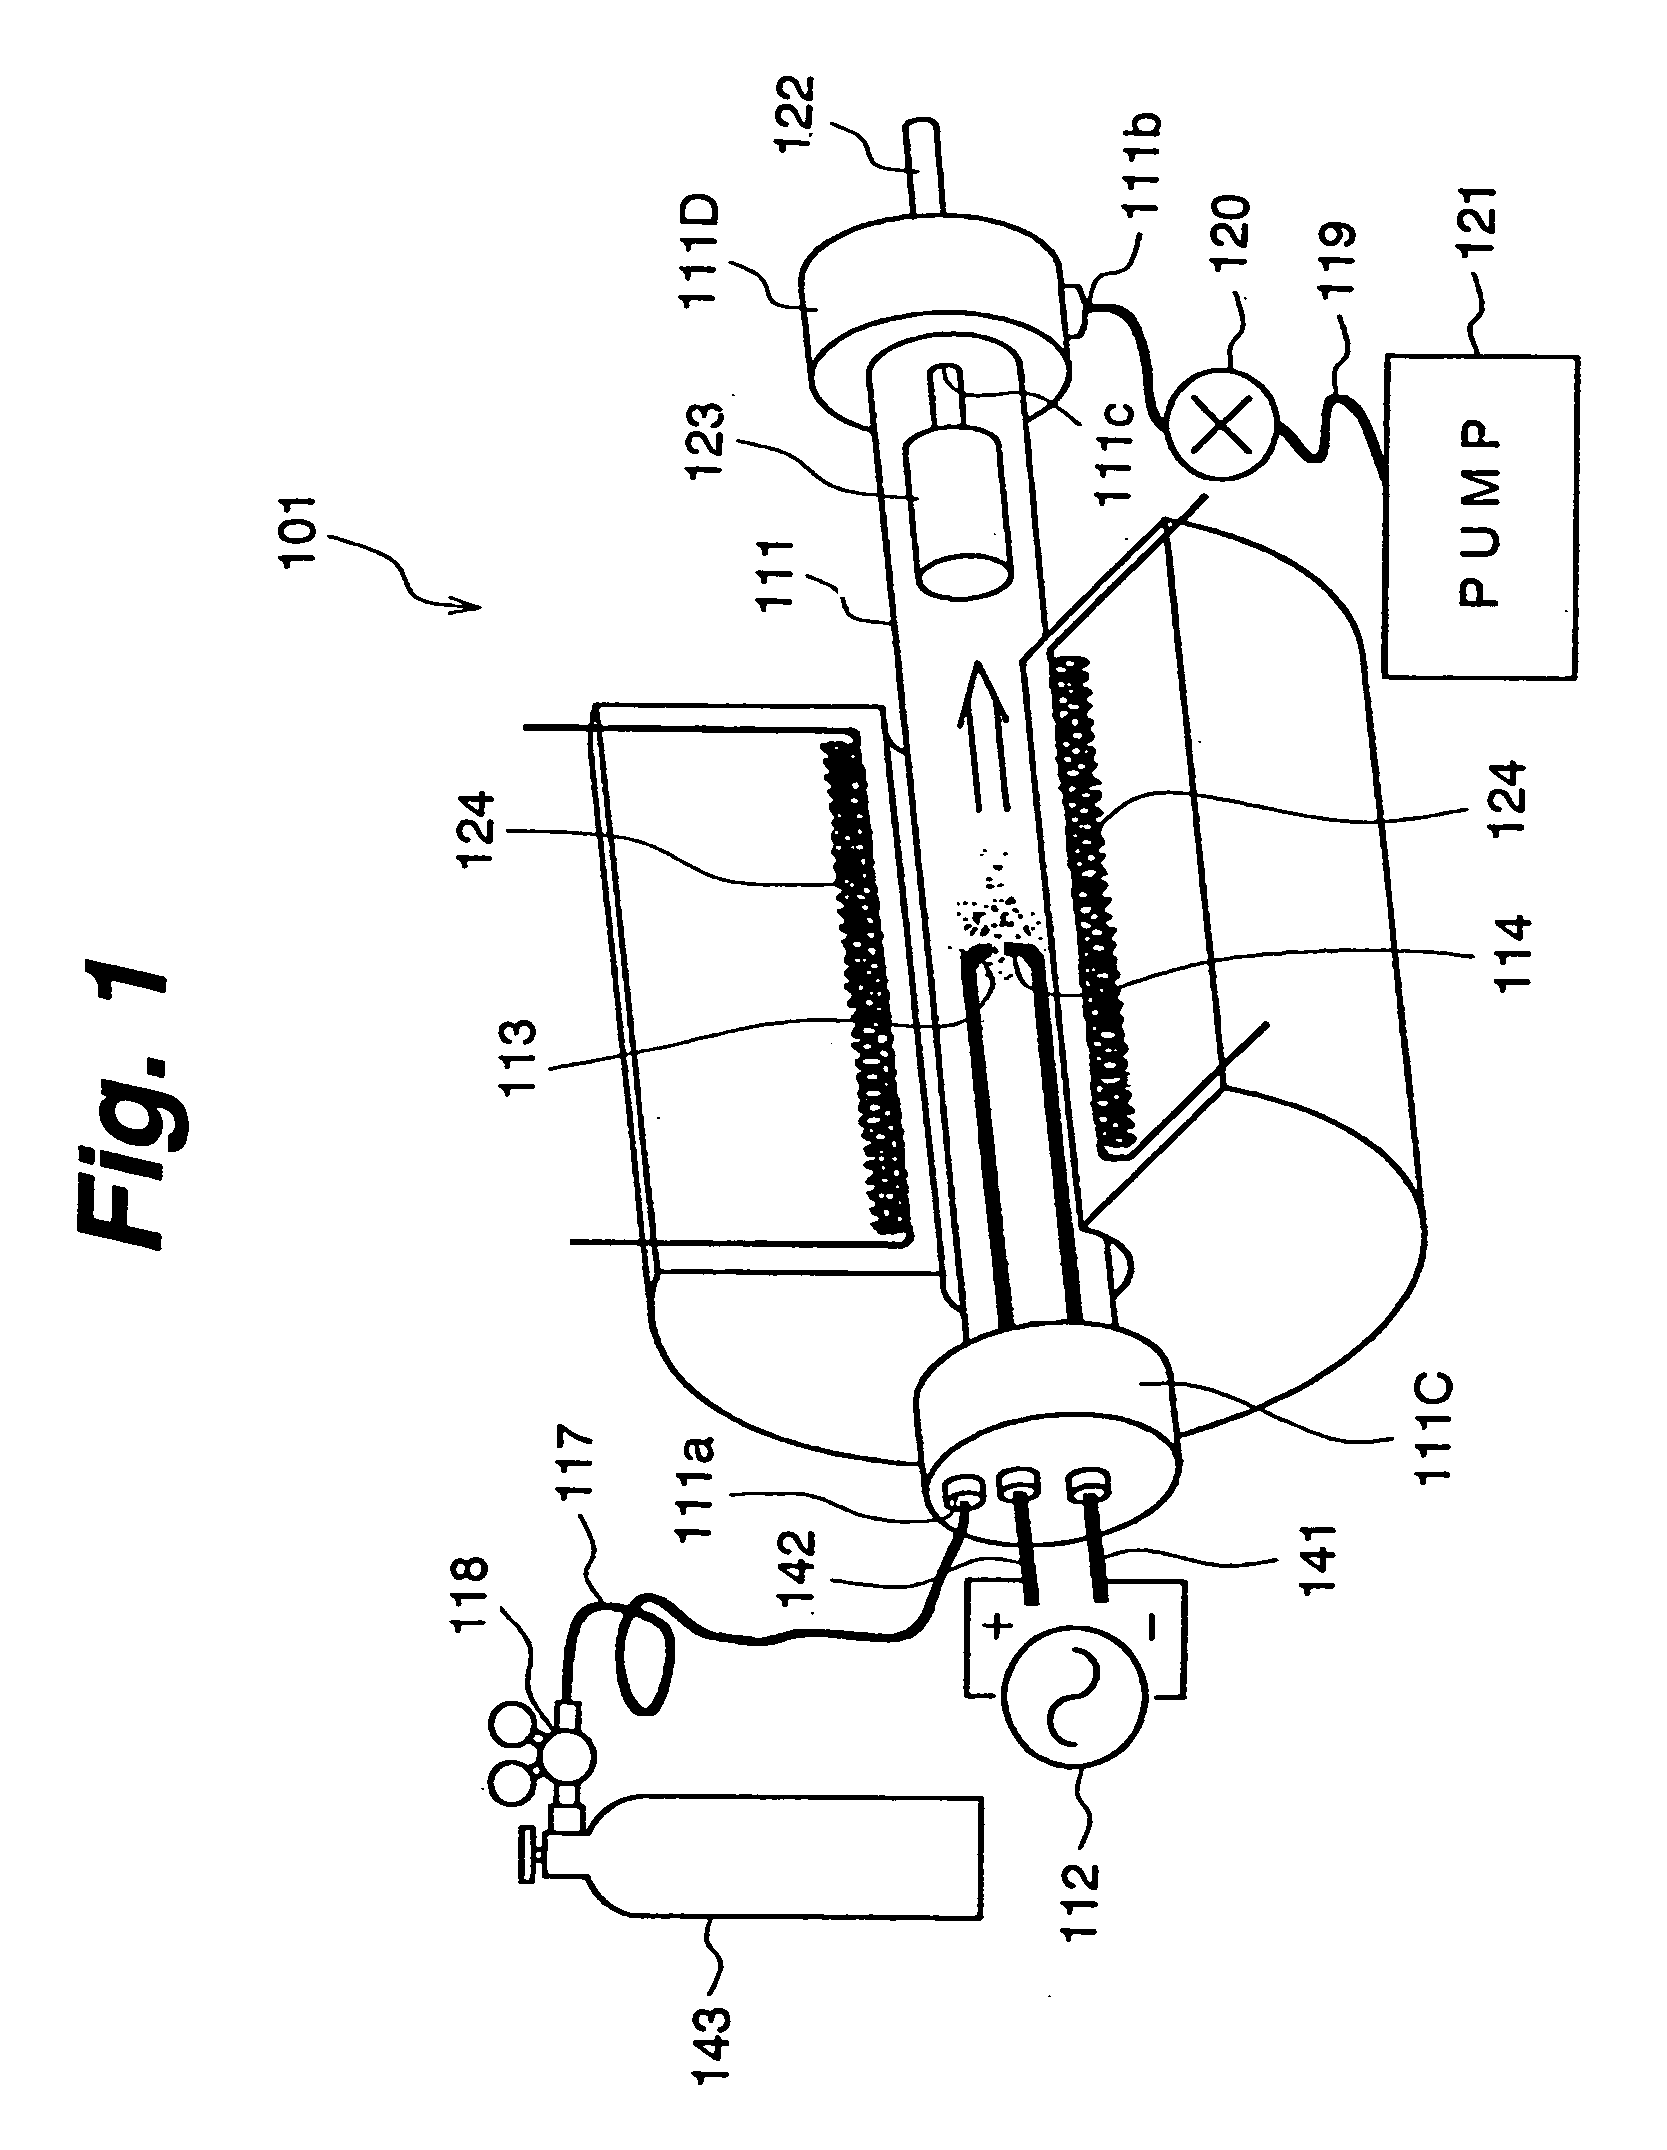 Device and method for manufacture of carbonaceous material